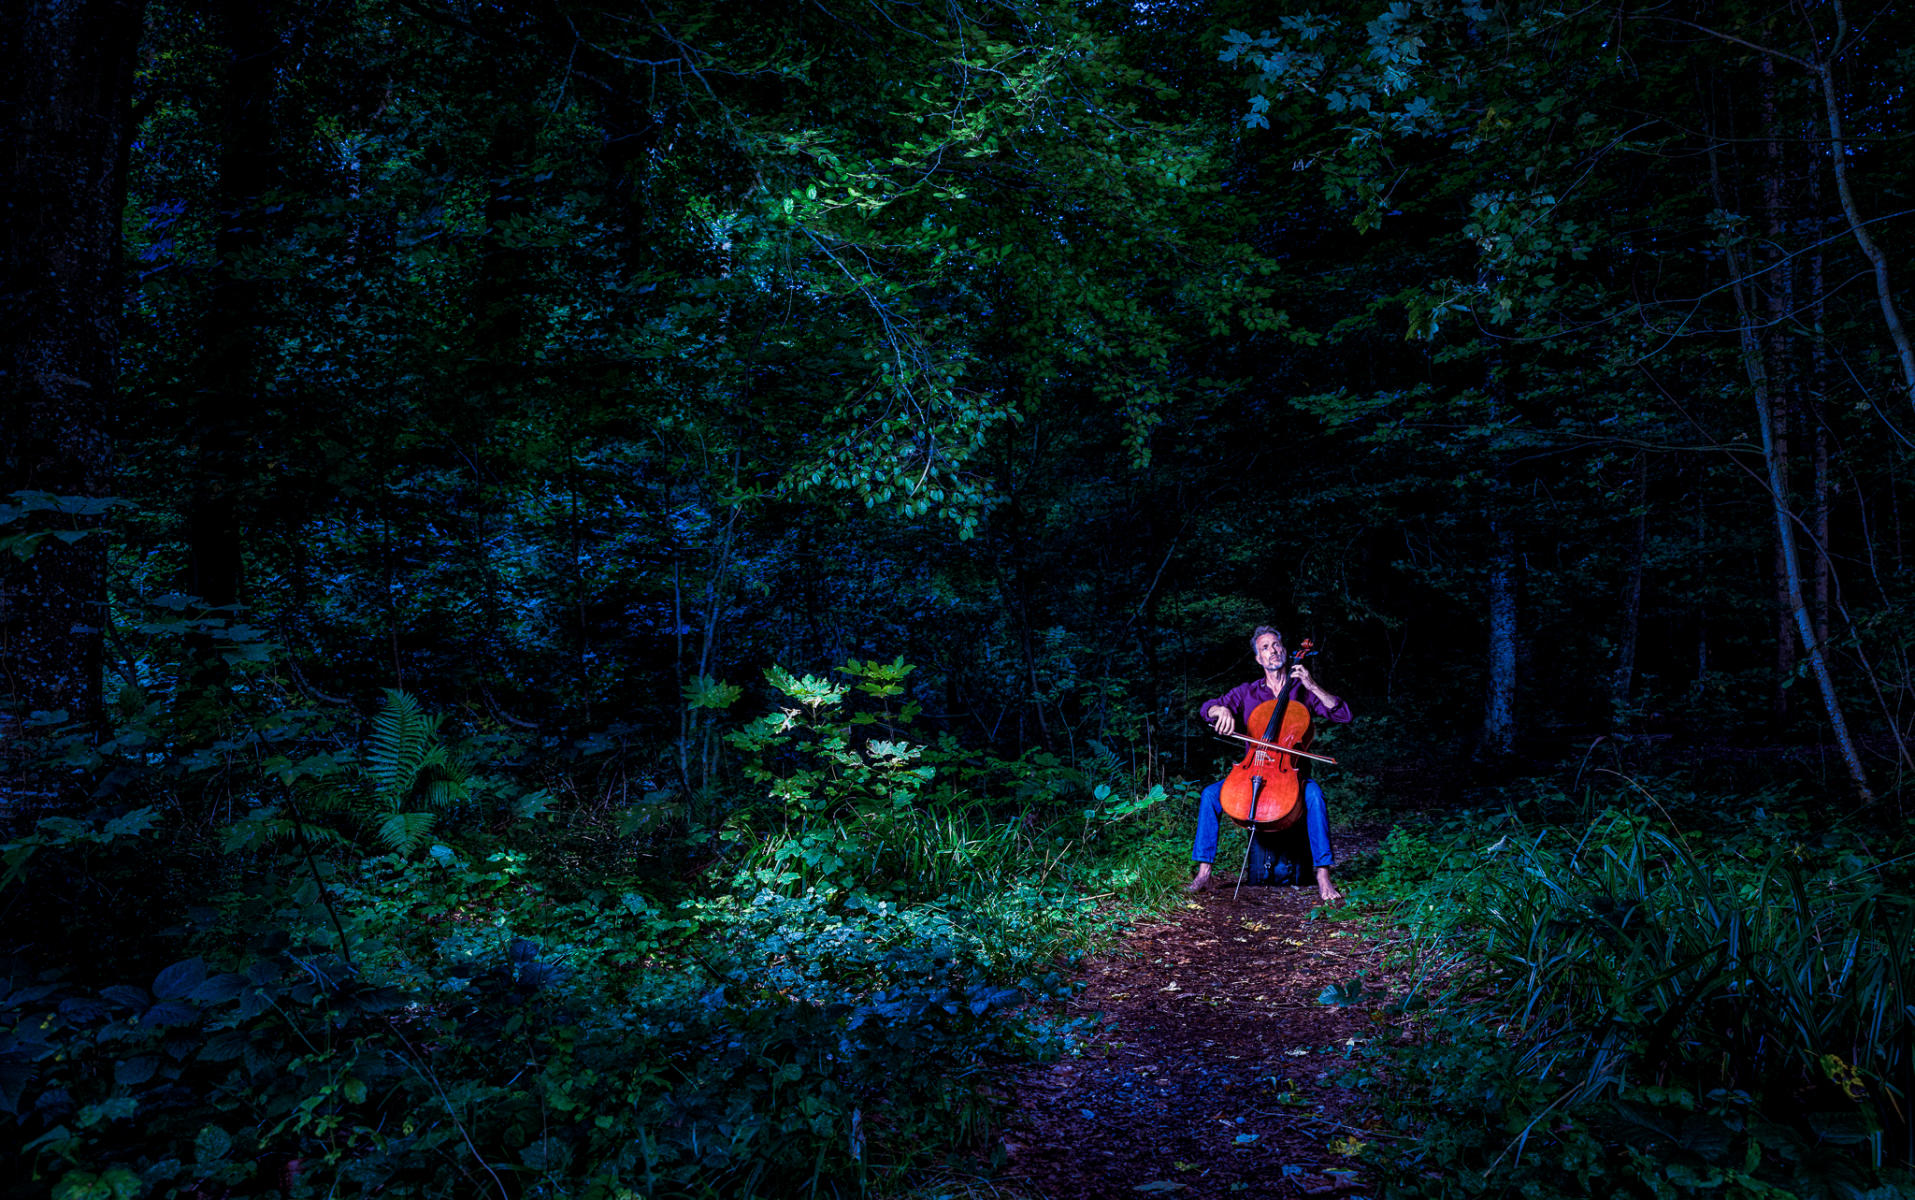 Into the Woods at Night #1